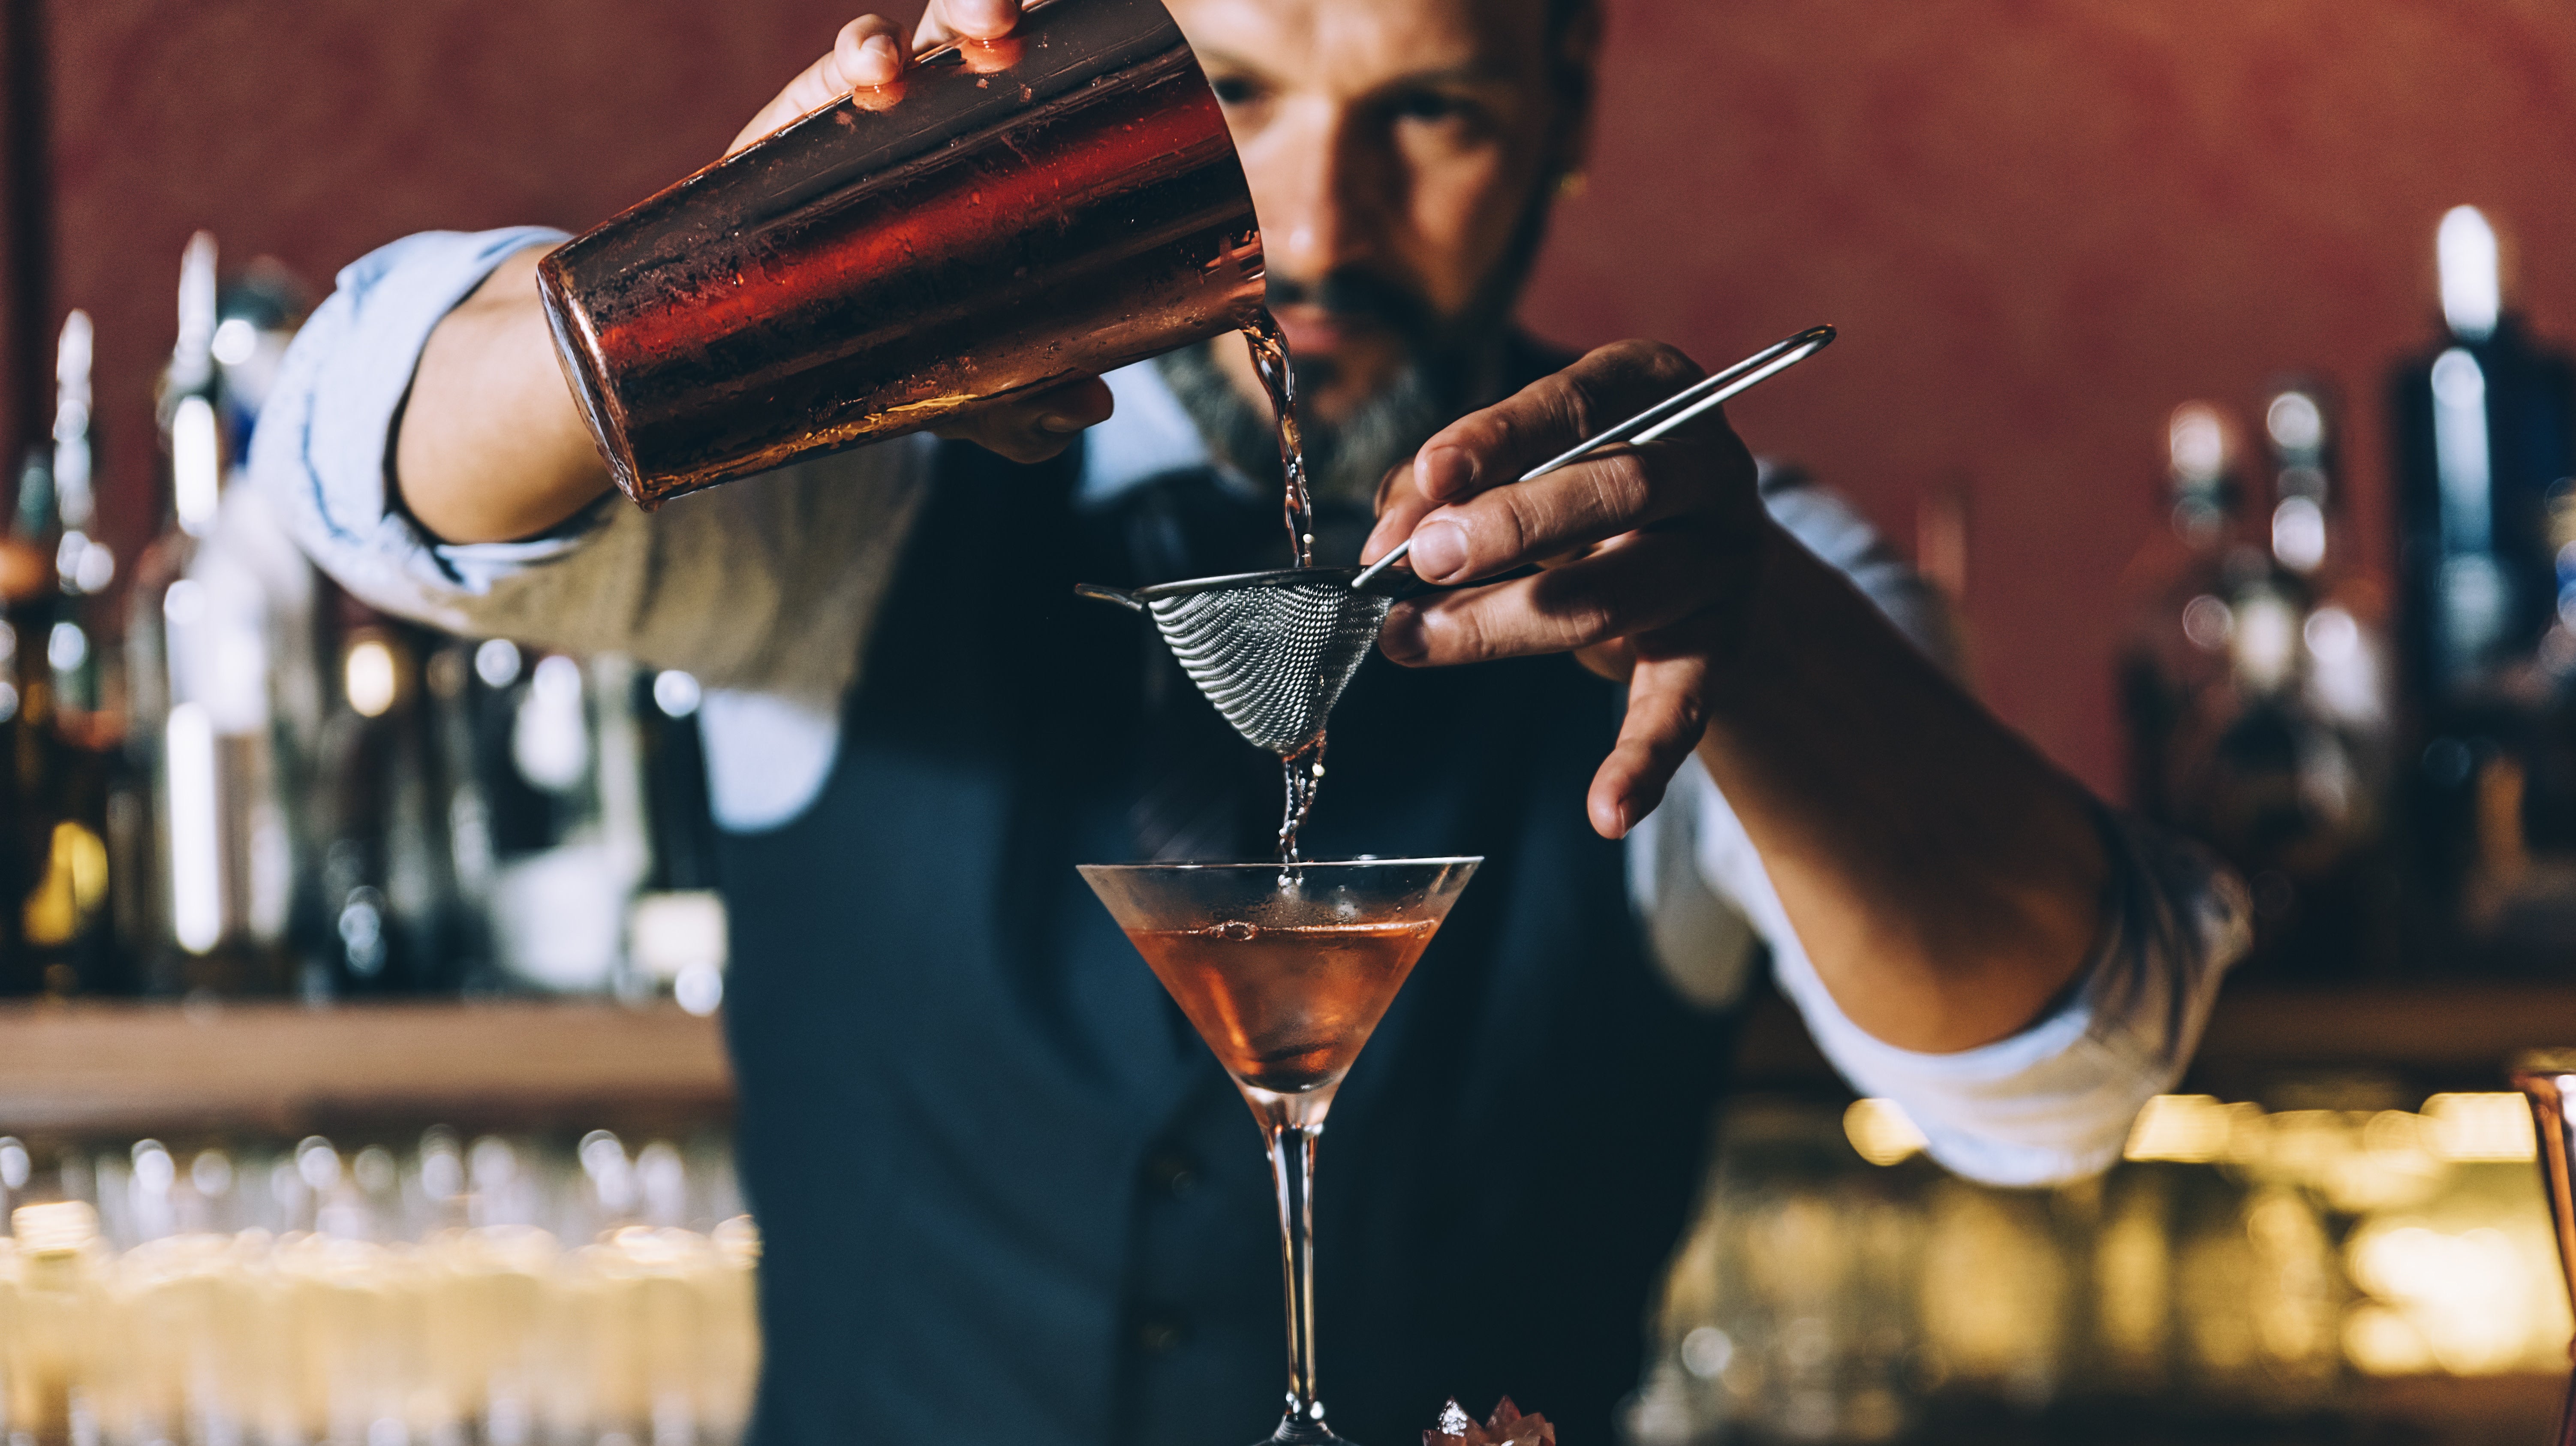 How To Get A Bartender’s Attention Without Being A Jerk